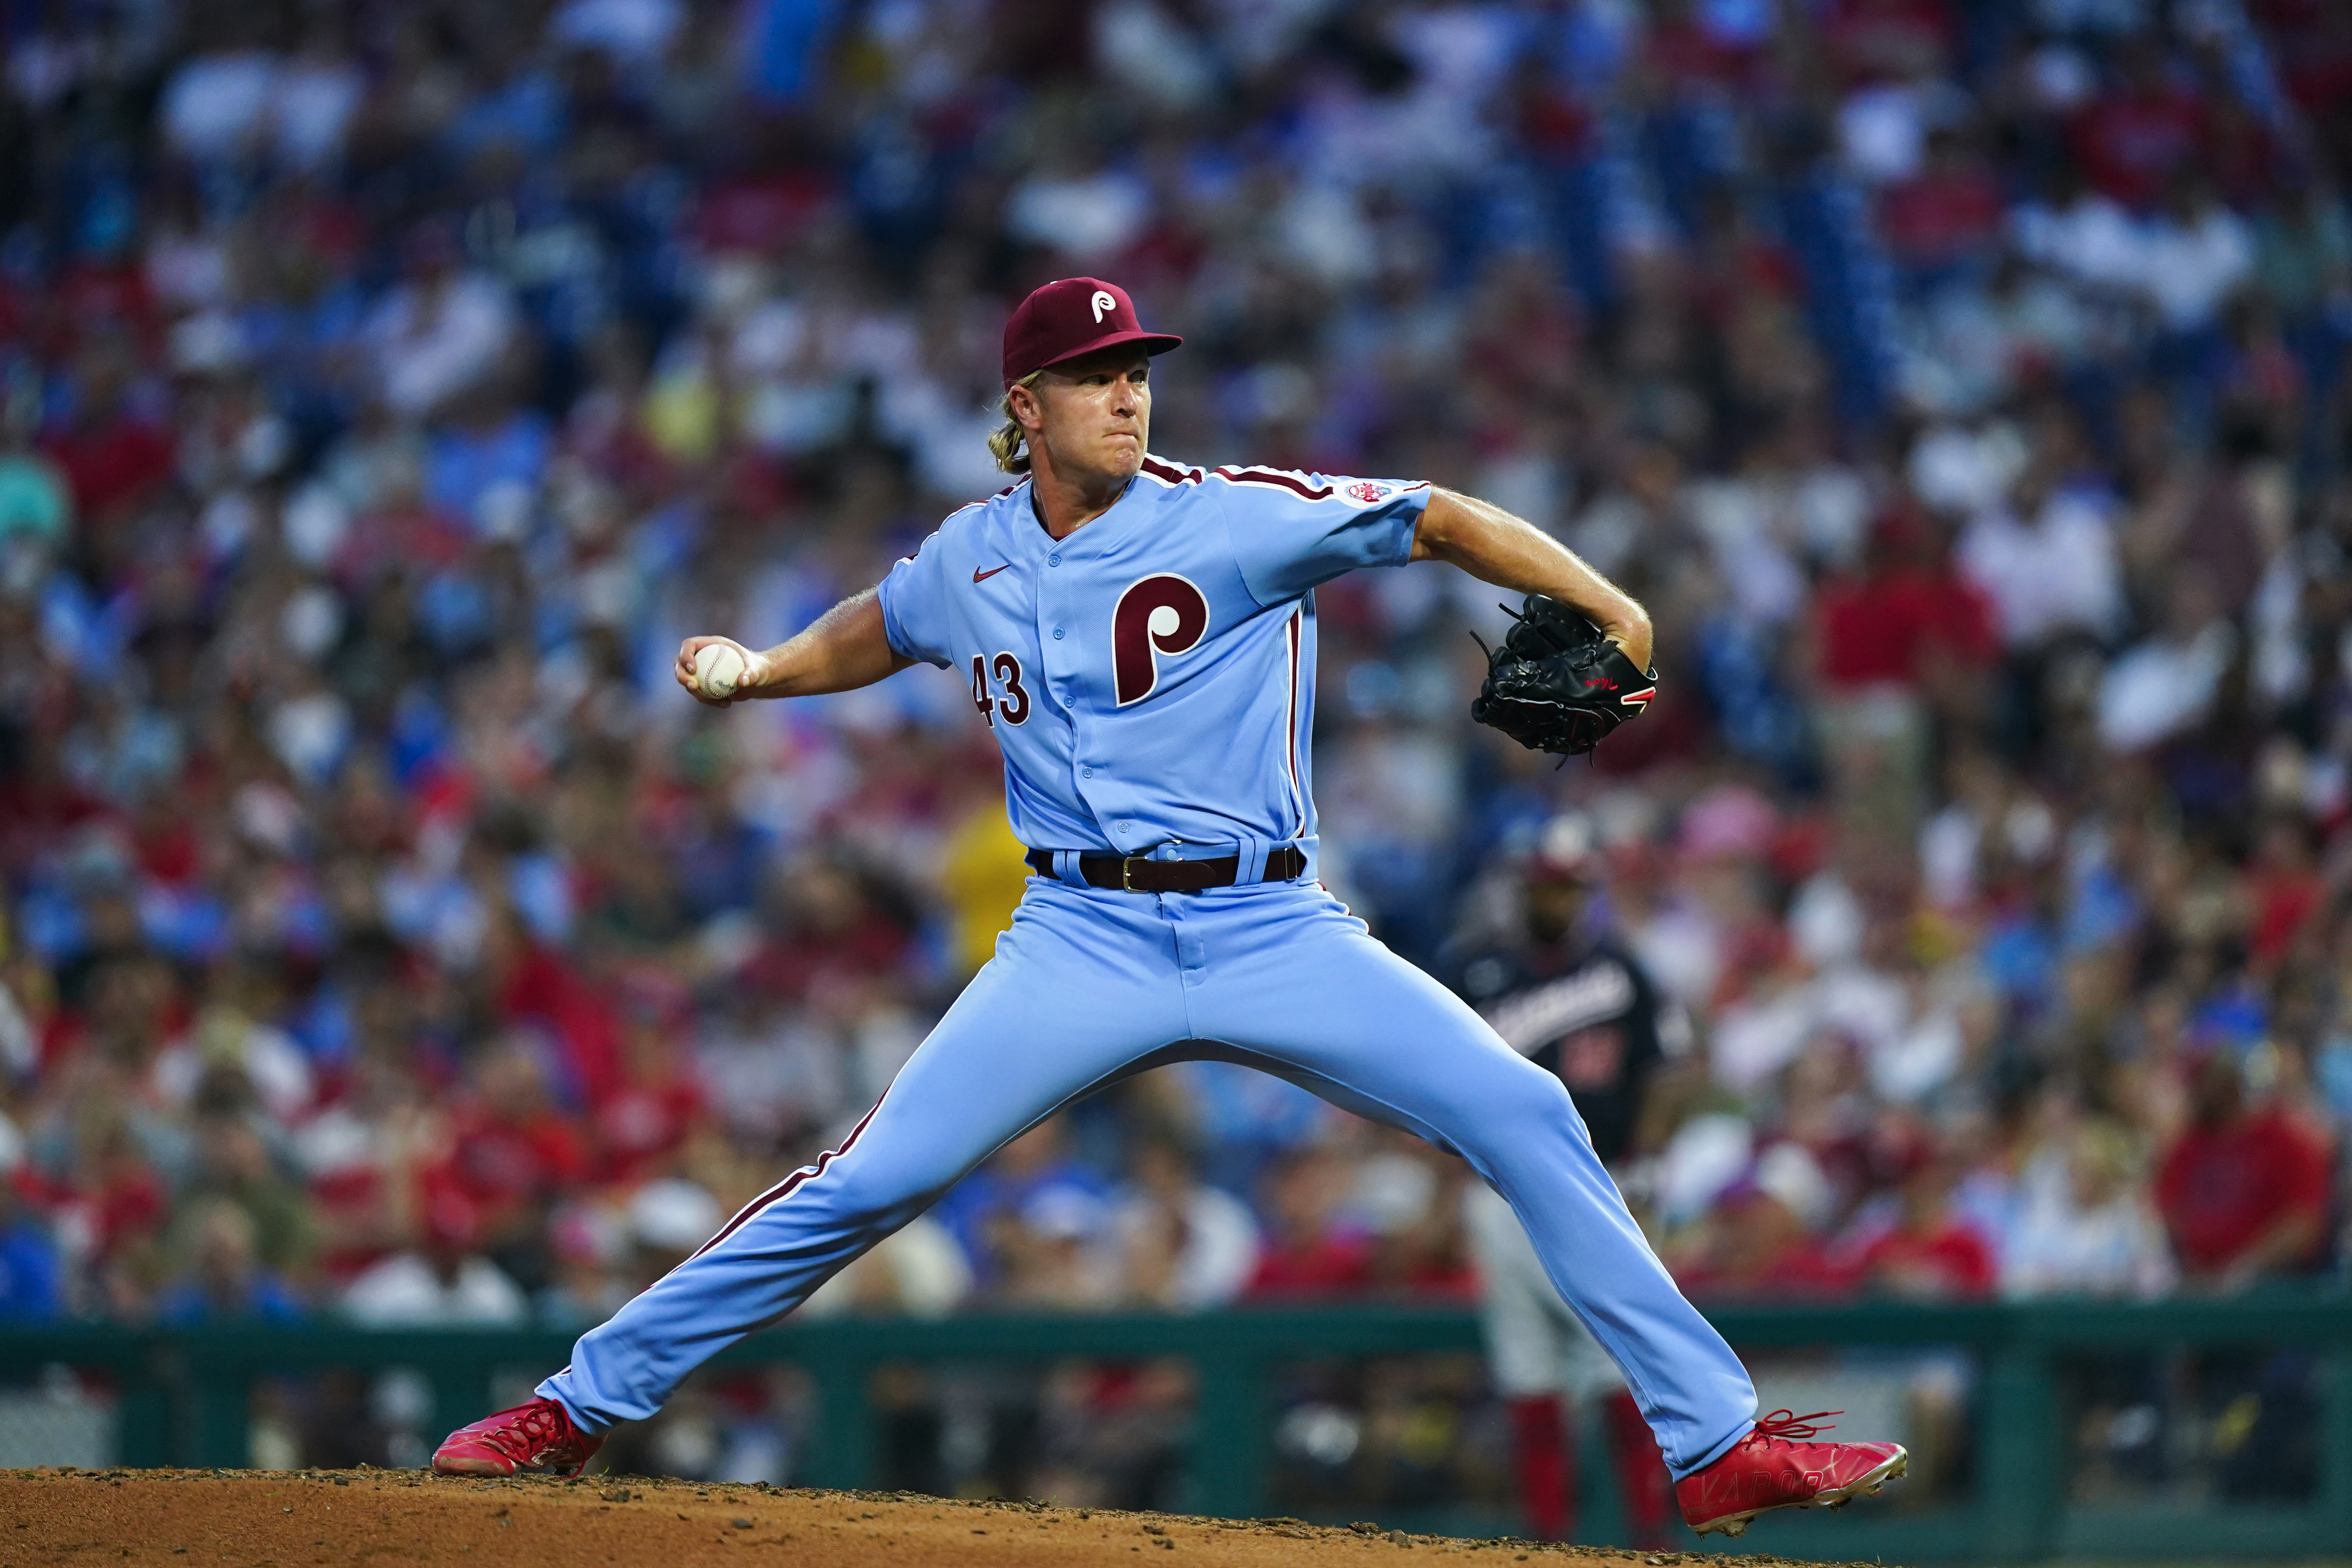 MLB Network - The #Phillies make a late splash, reportedly